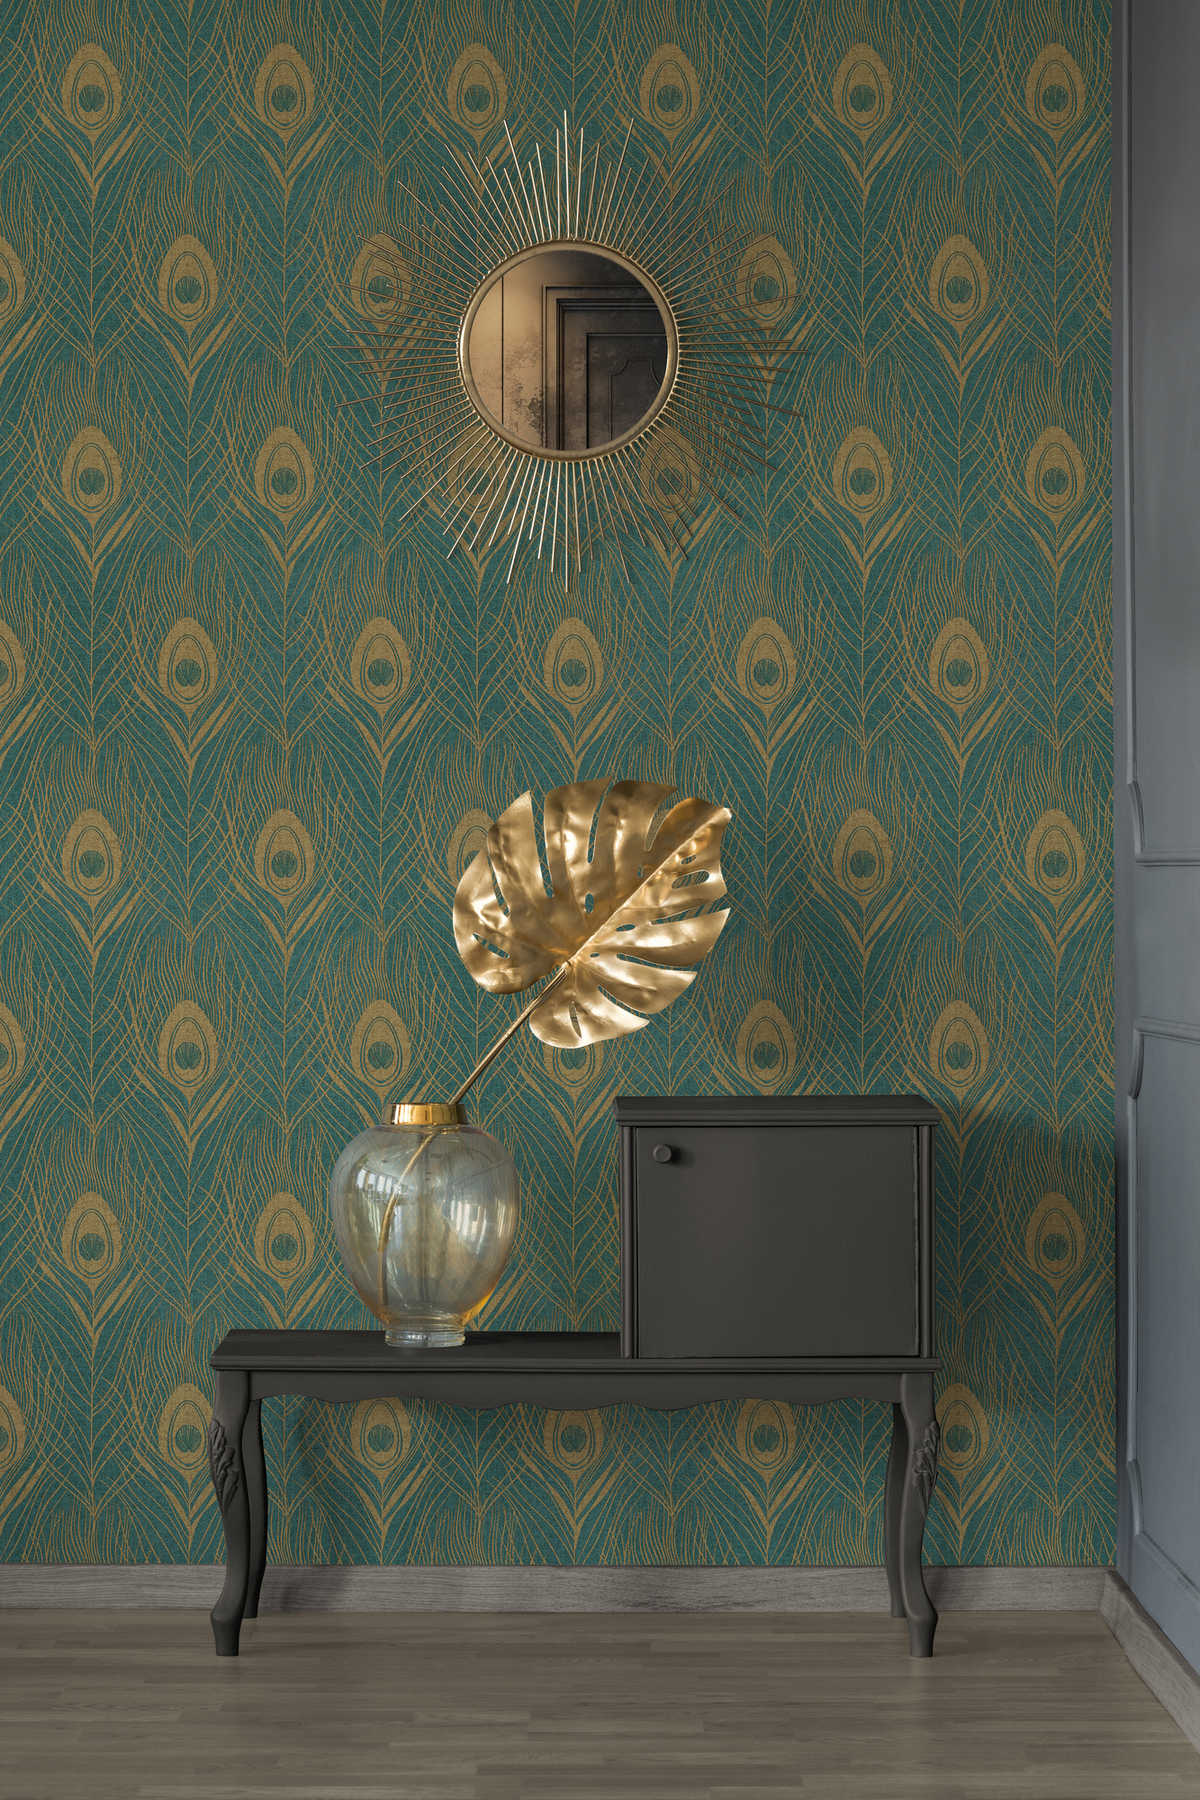             Aquamarine non-woven wallpaper with peacock feathers in metallic look - gold, green, yellow
        